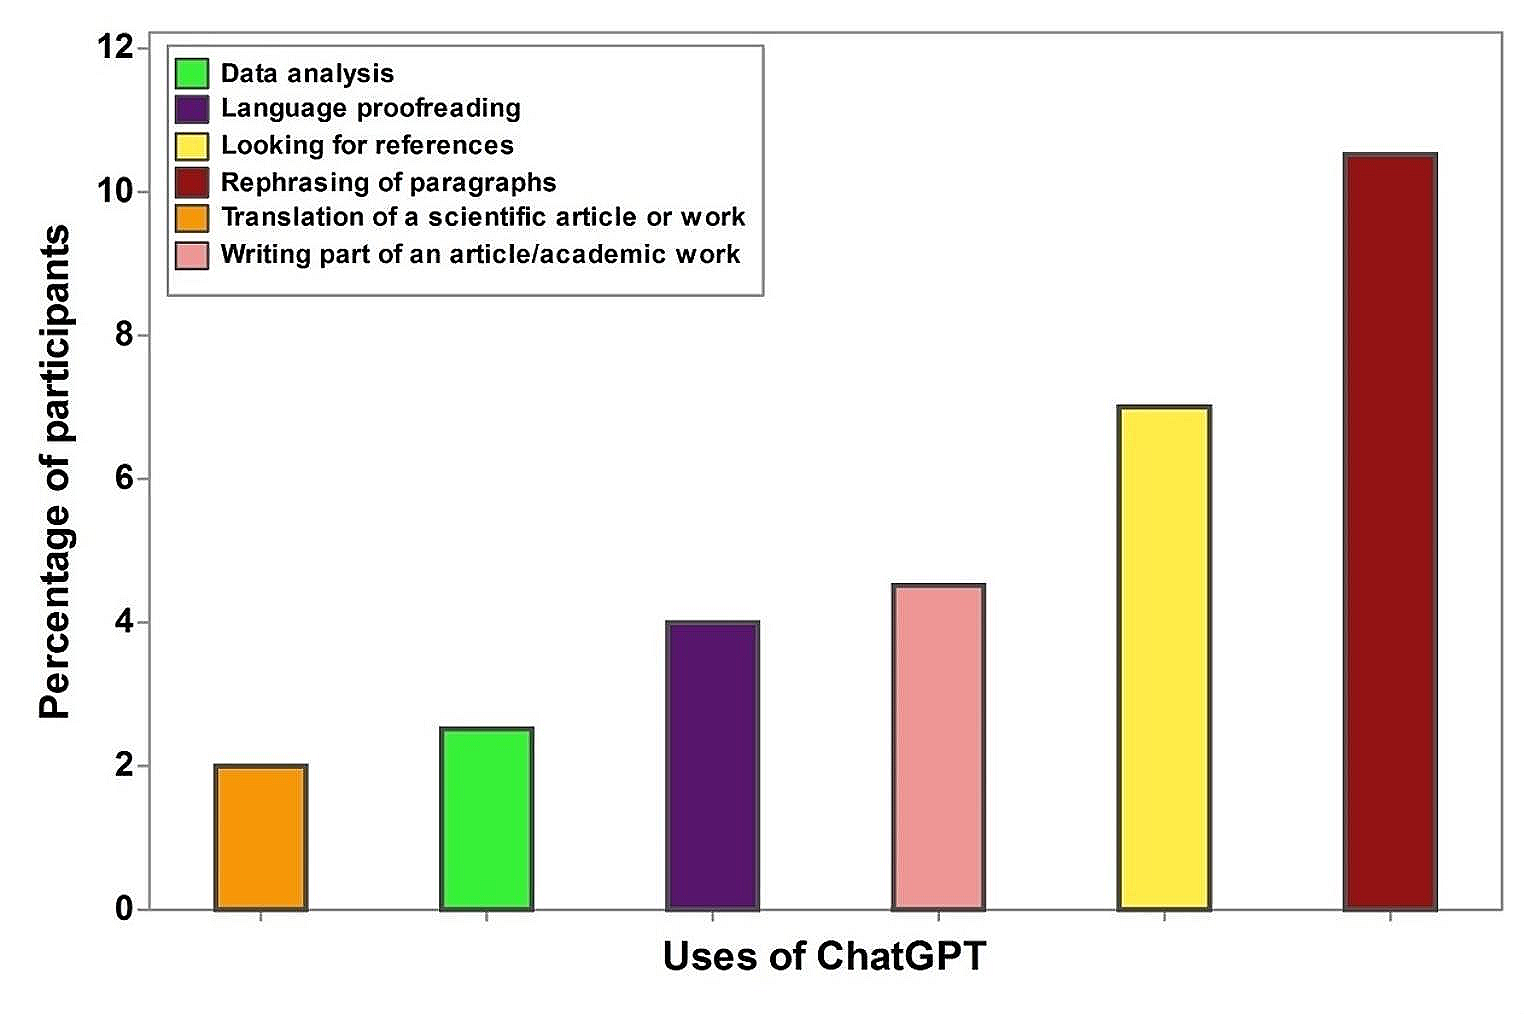 Knowledge, Perceptions and Attitude of Researchers Towards Using ChatGPT in Research